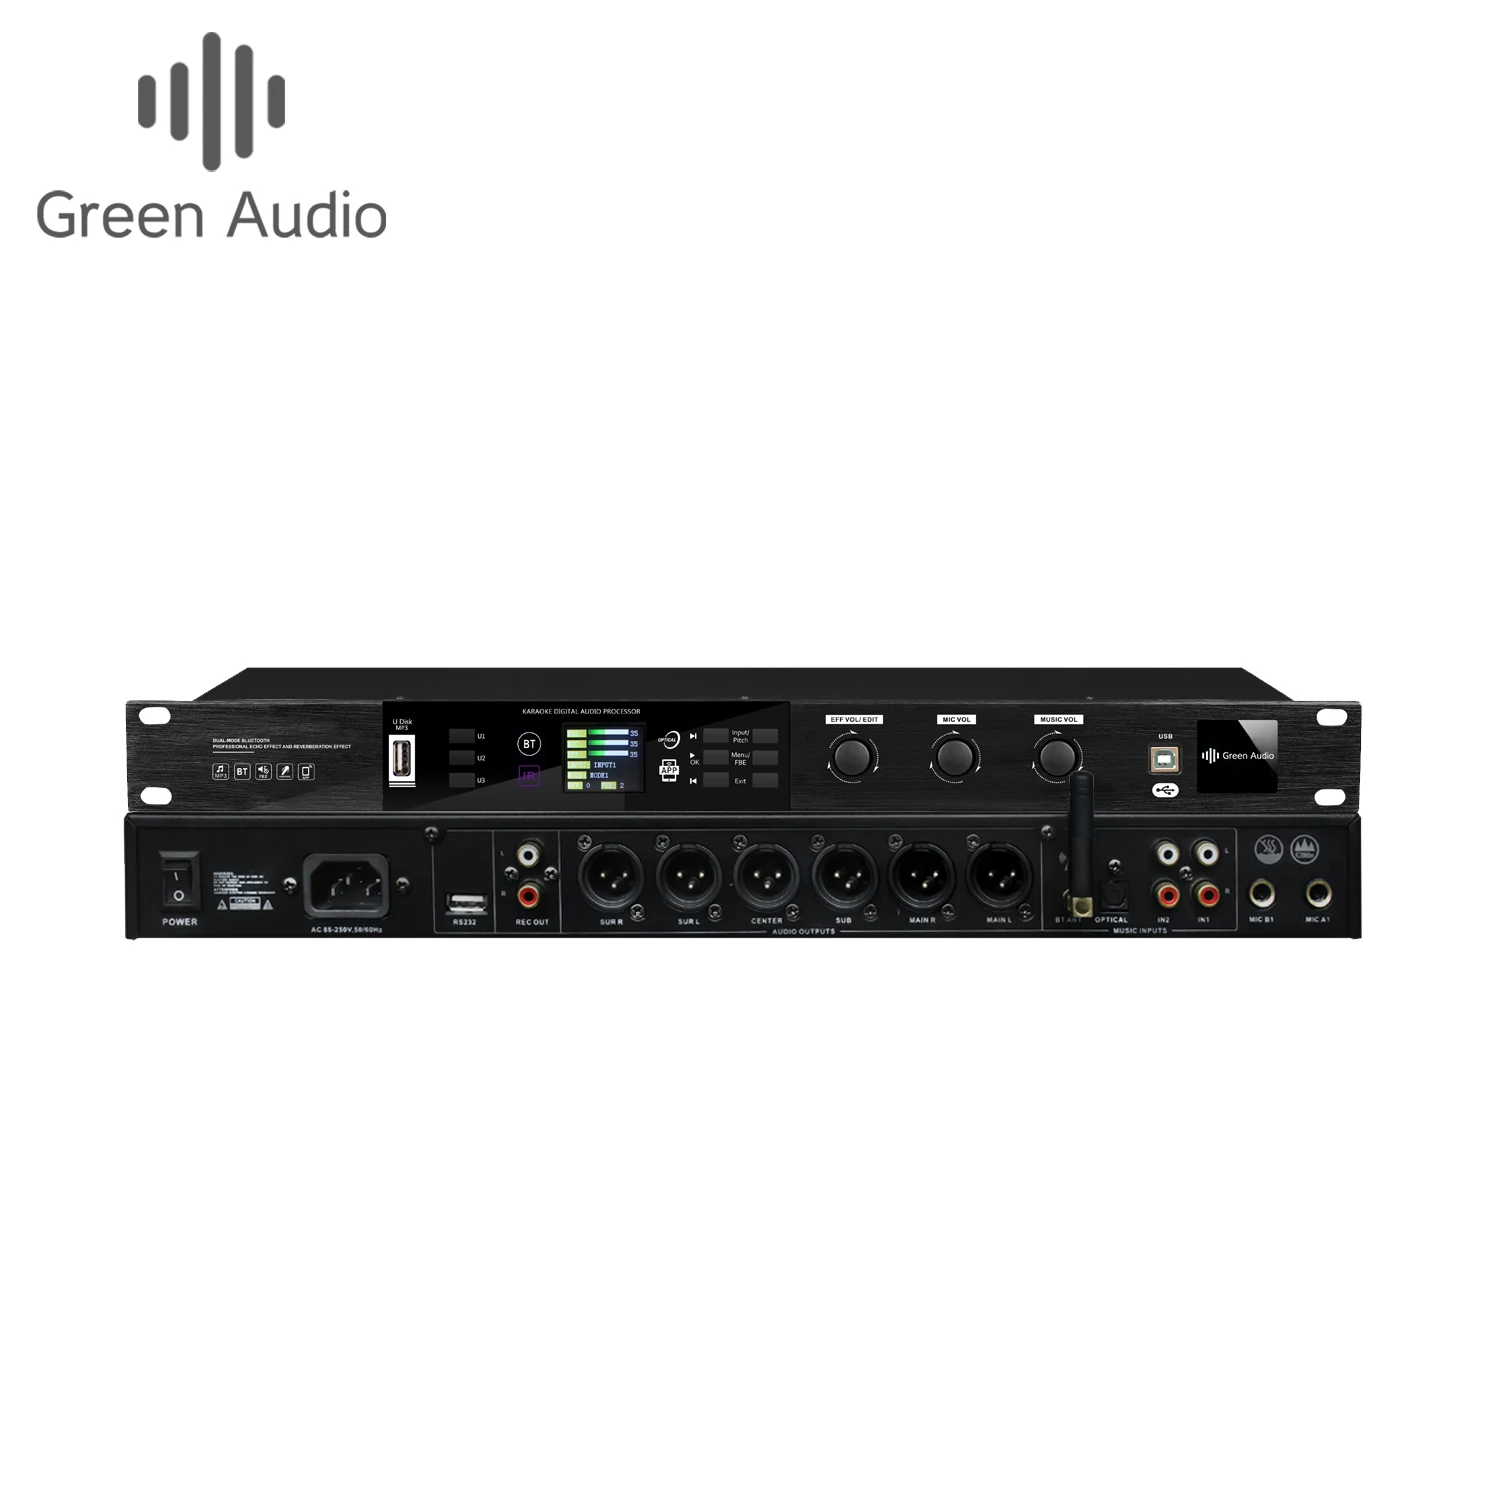 

GAX-K510 Digital and analog double effect front stage effector built-in 32-bit high-performance DSP